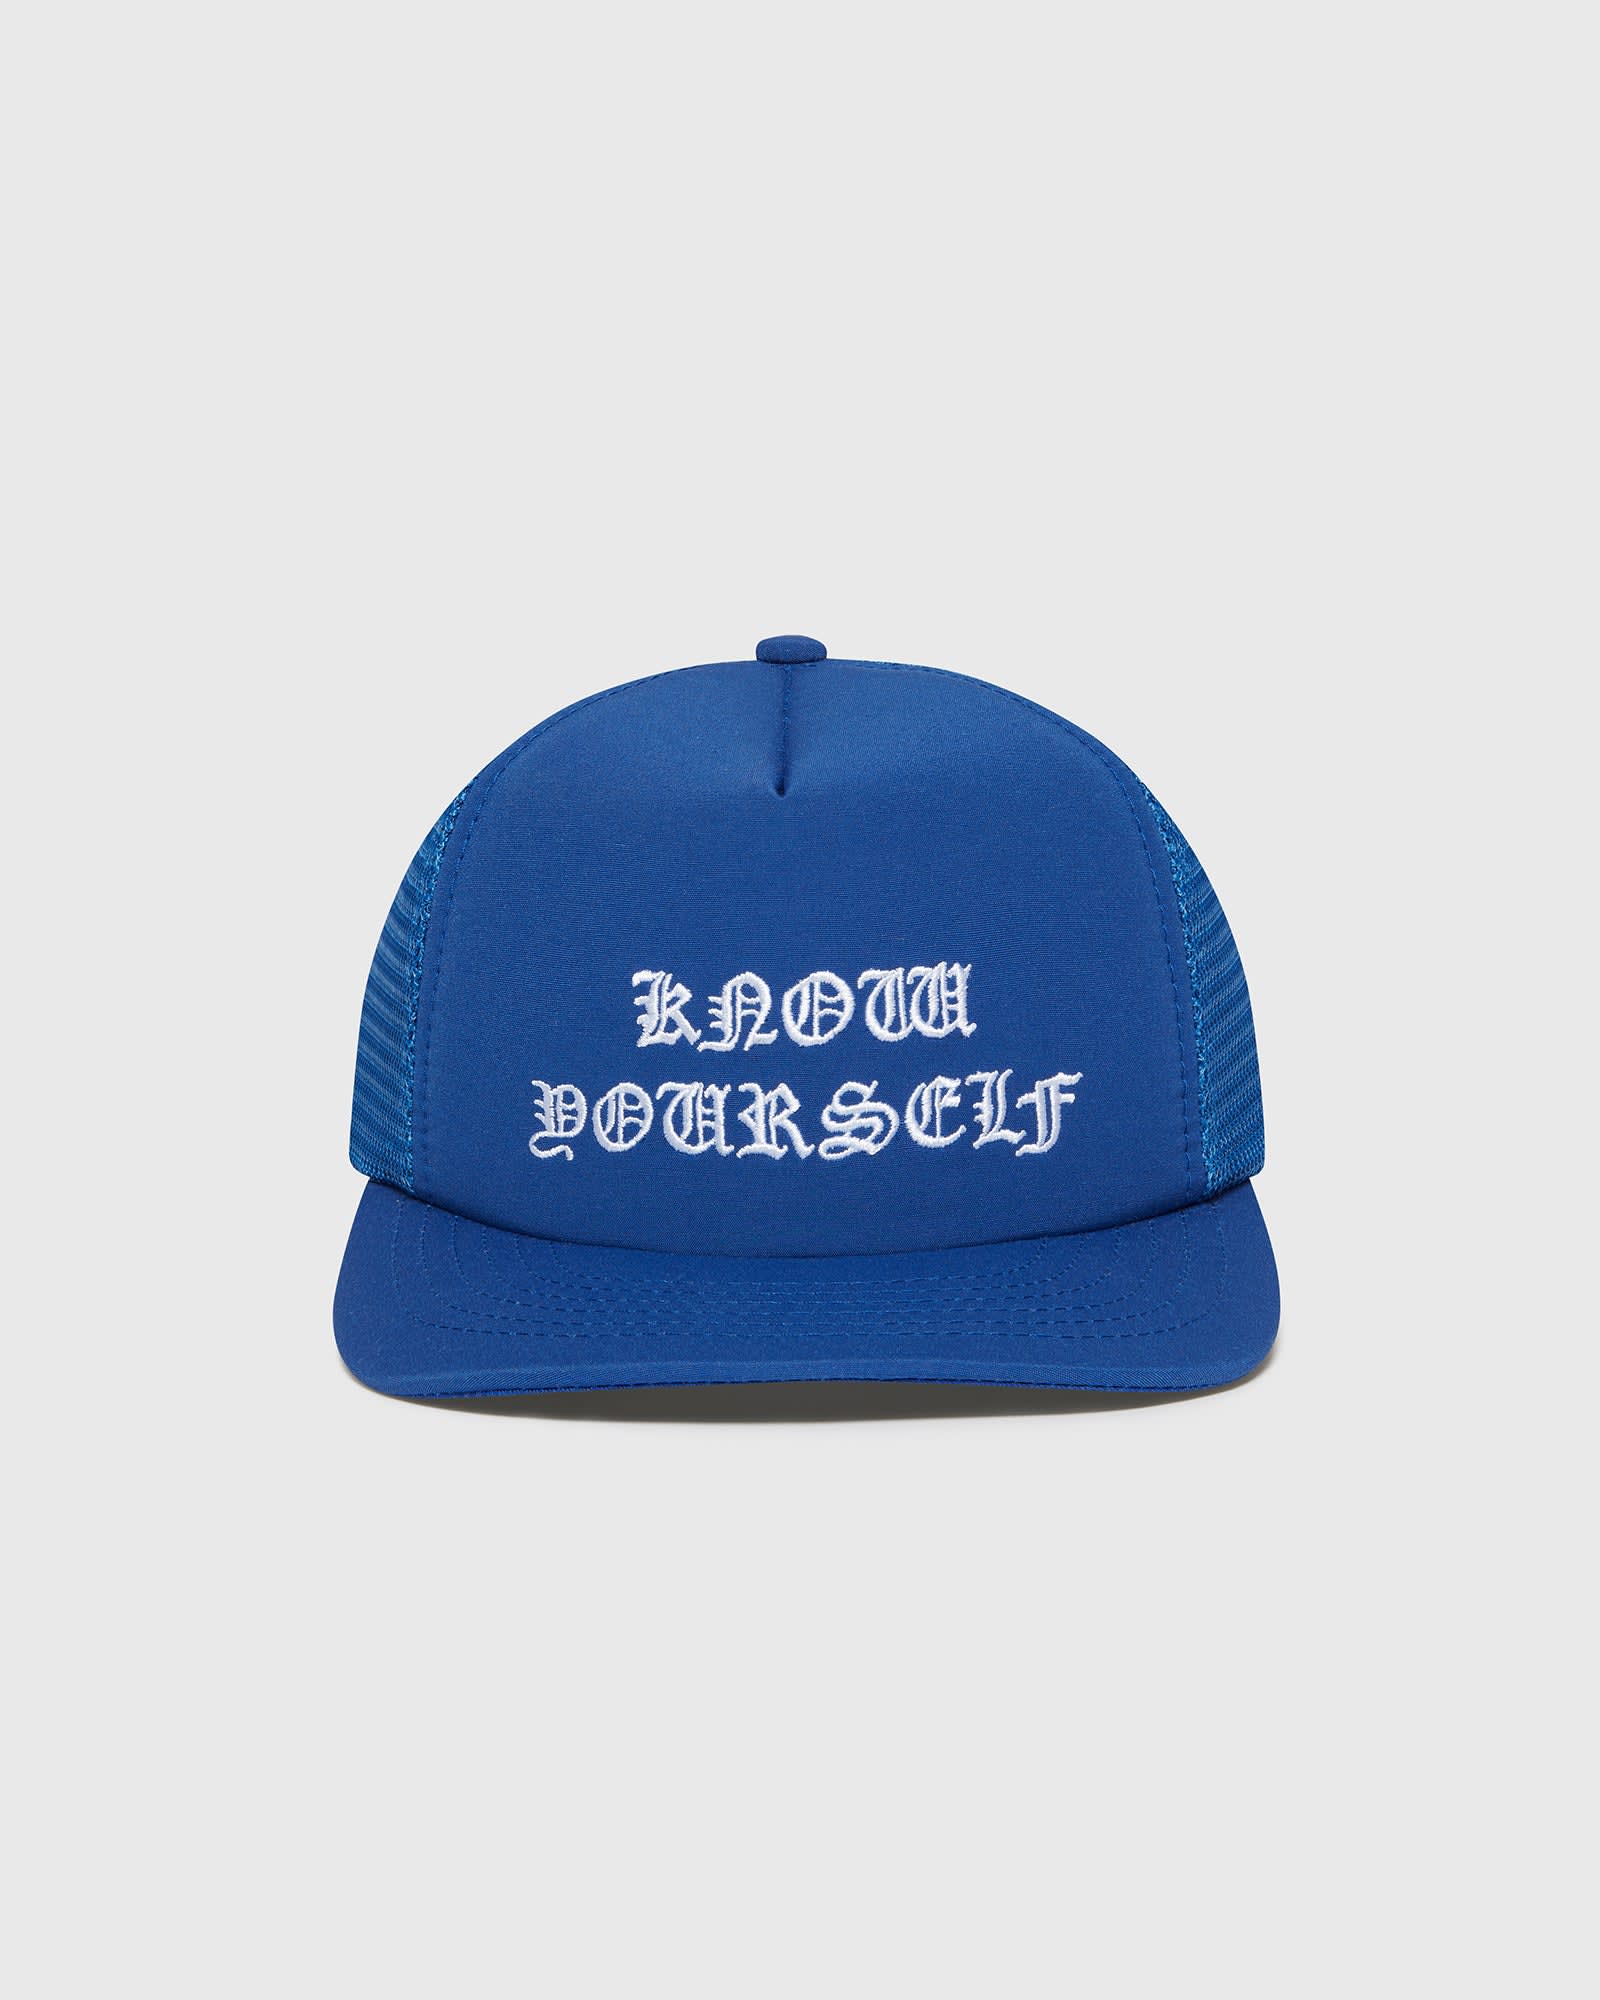 KNOW YOURSELF TRUCKER HAT - ROYAL BLUE